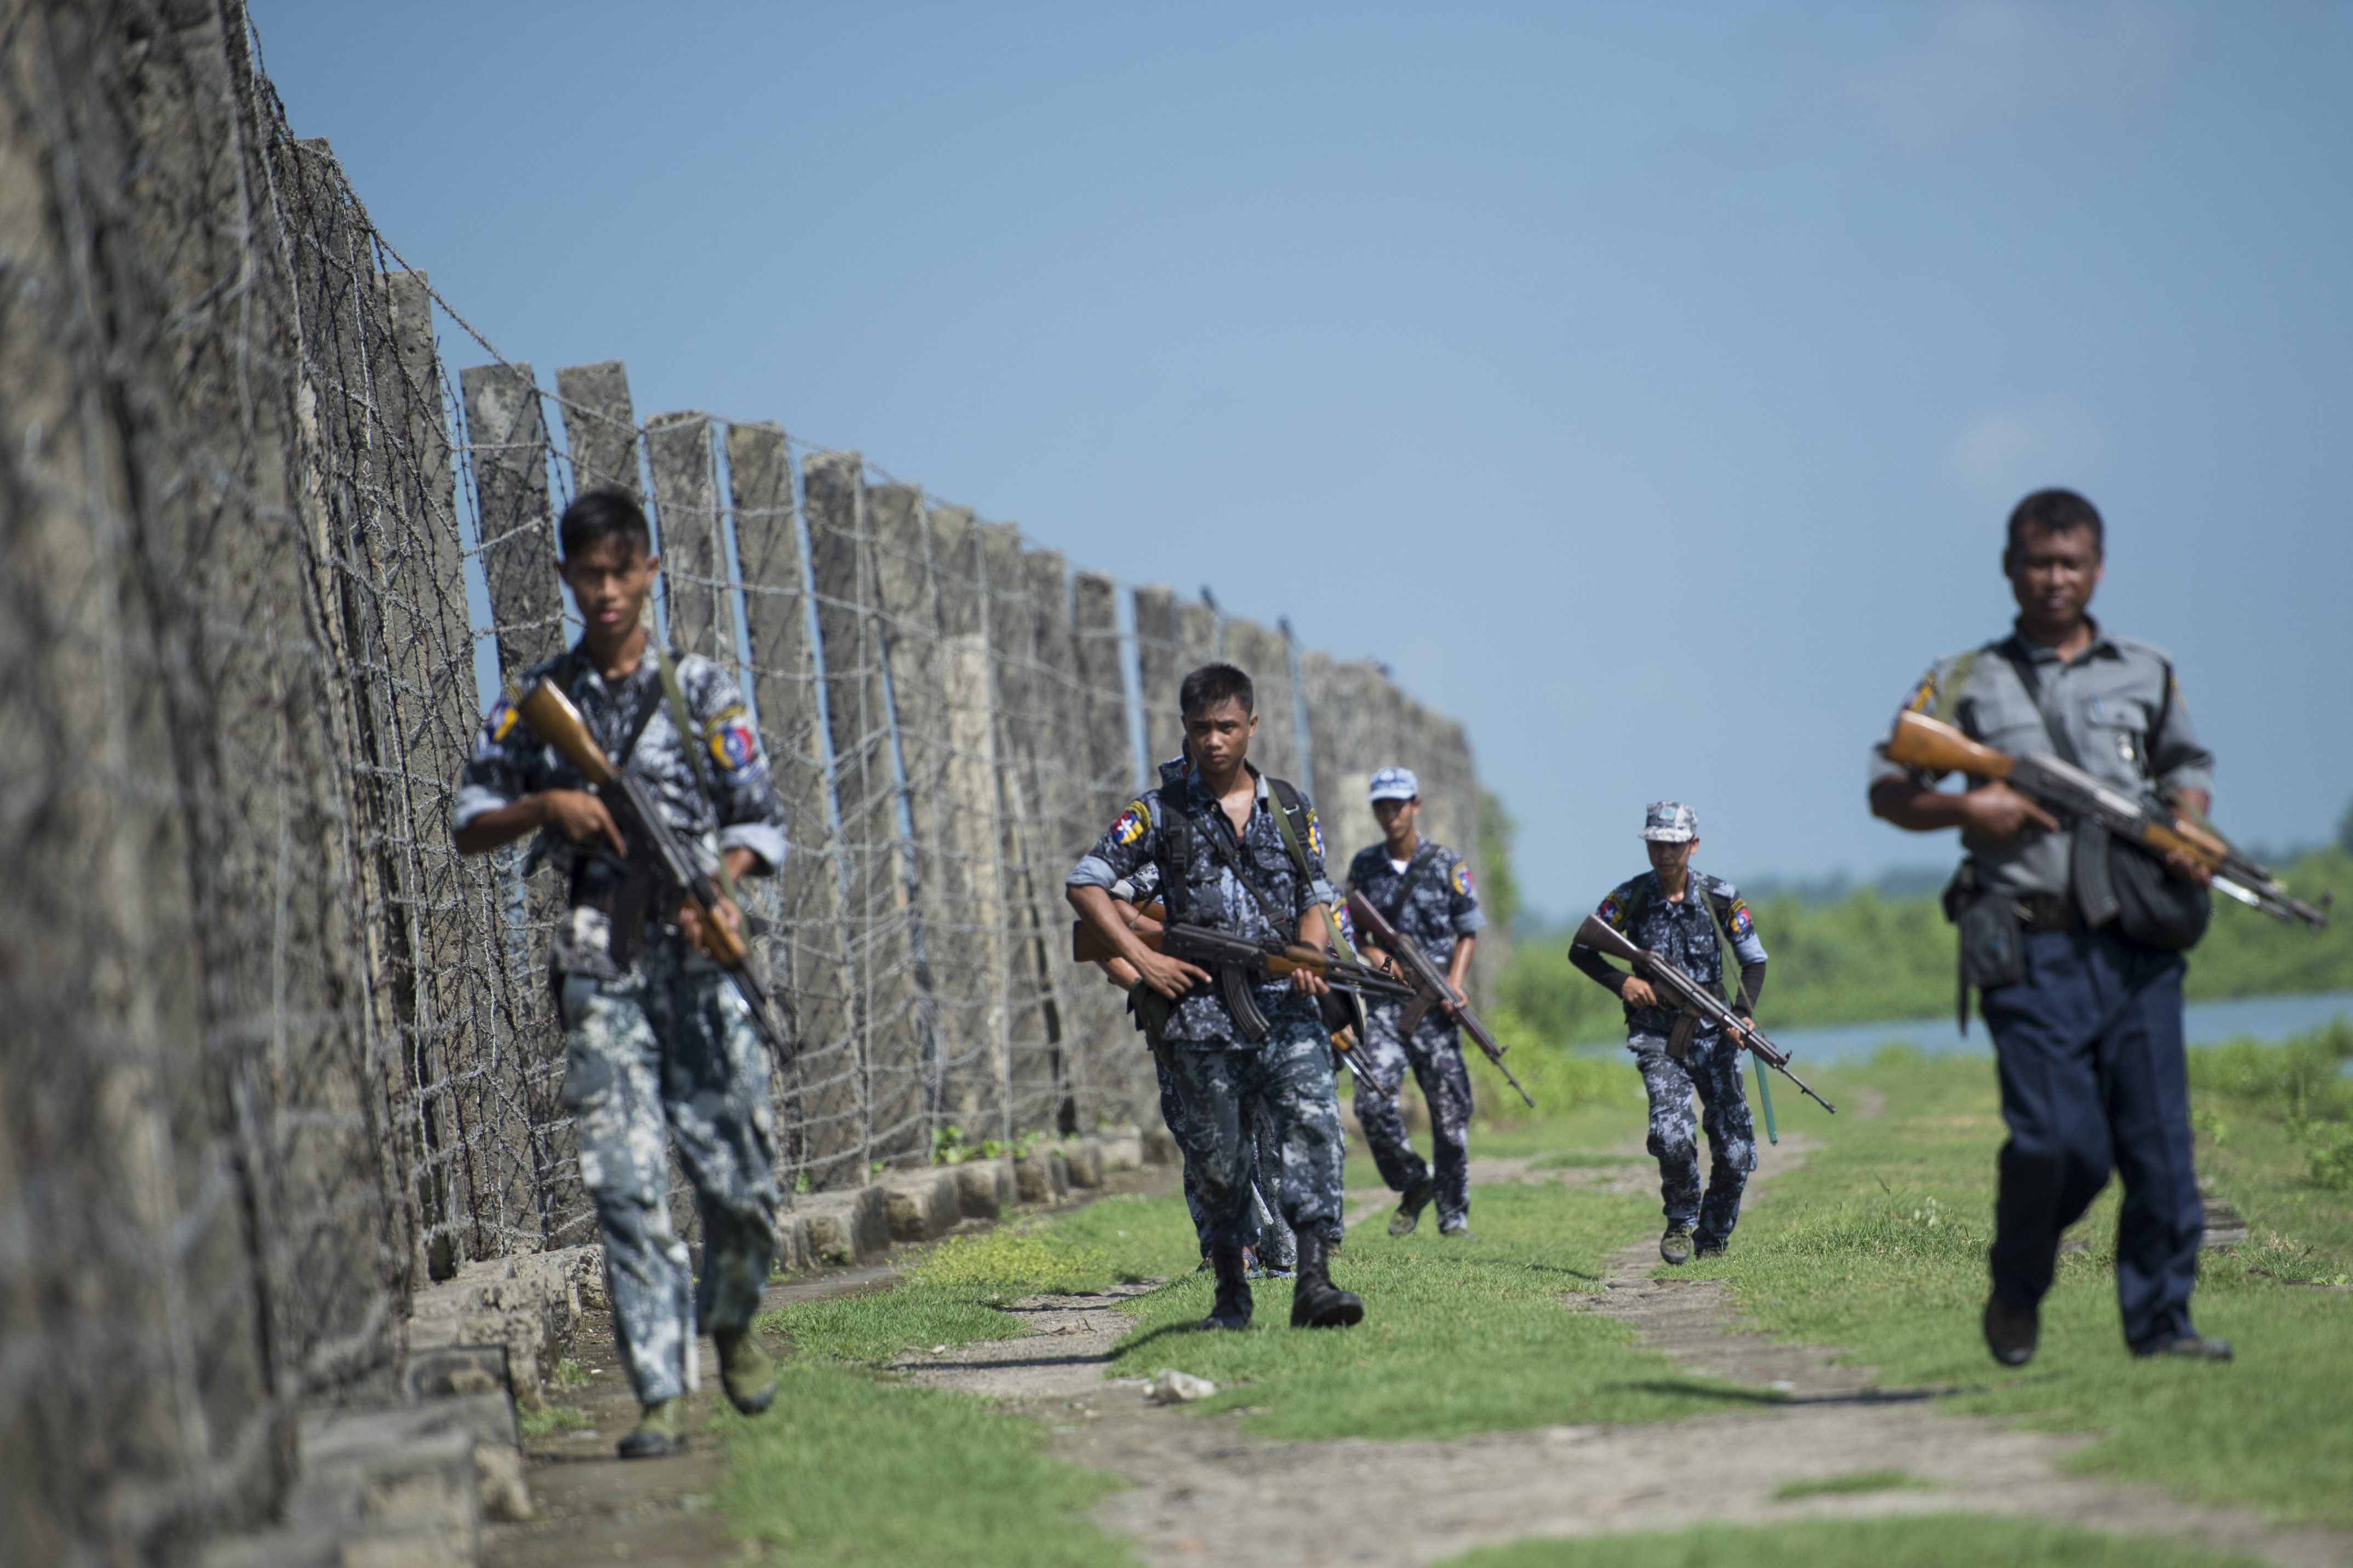 Armed Burma border police scan the area near the Bangladesh border  in Maungdaw, Arakan State on October 15, 2016 (Ye Aung Thu—AFP / Getty Images)